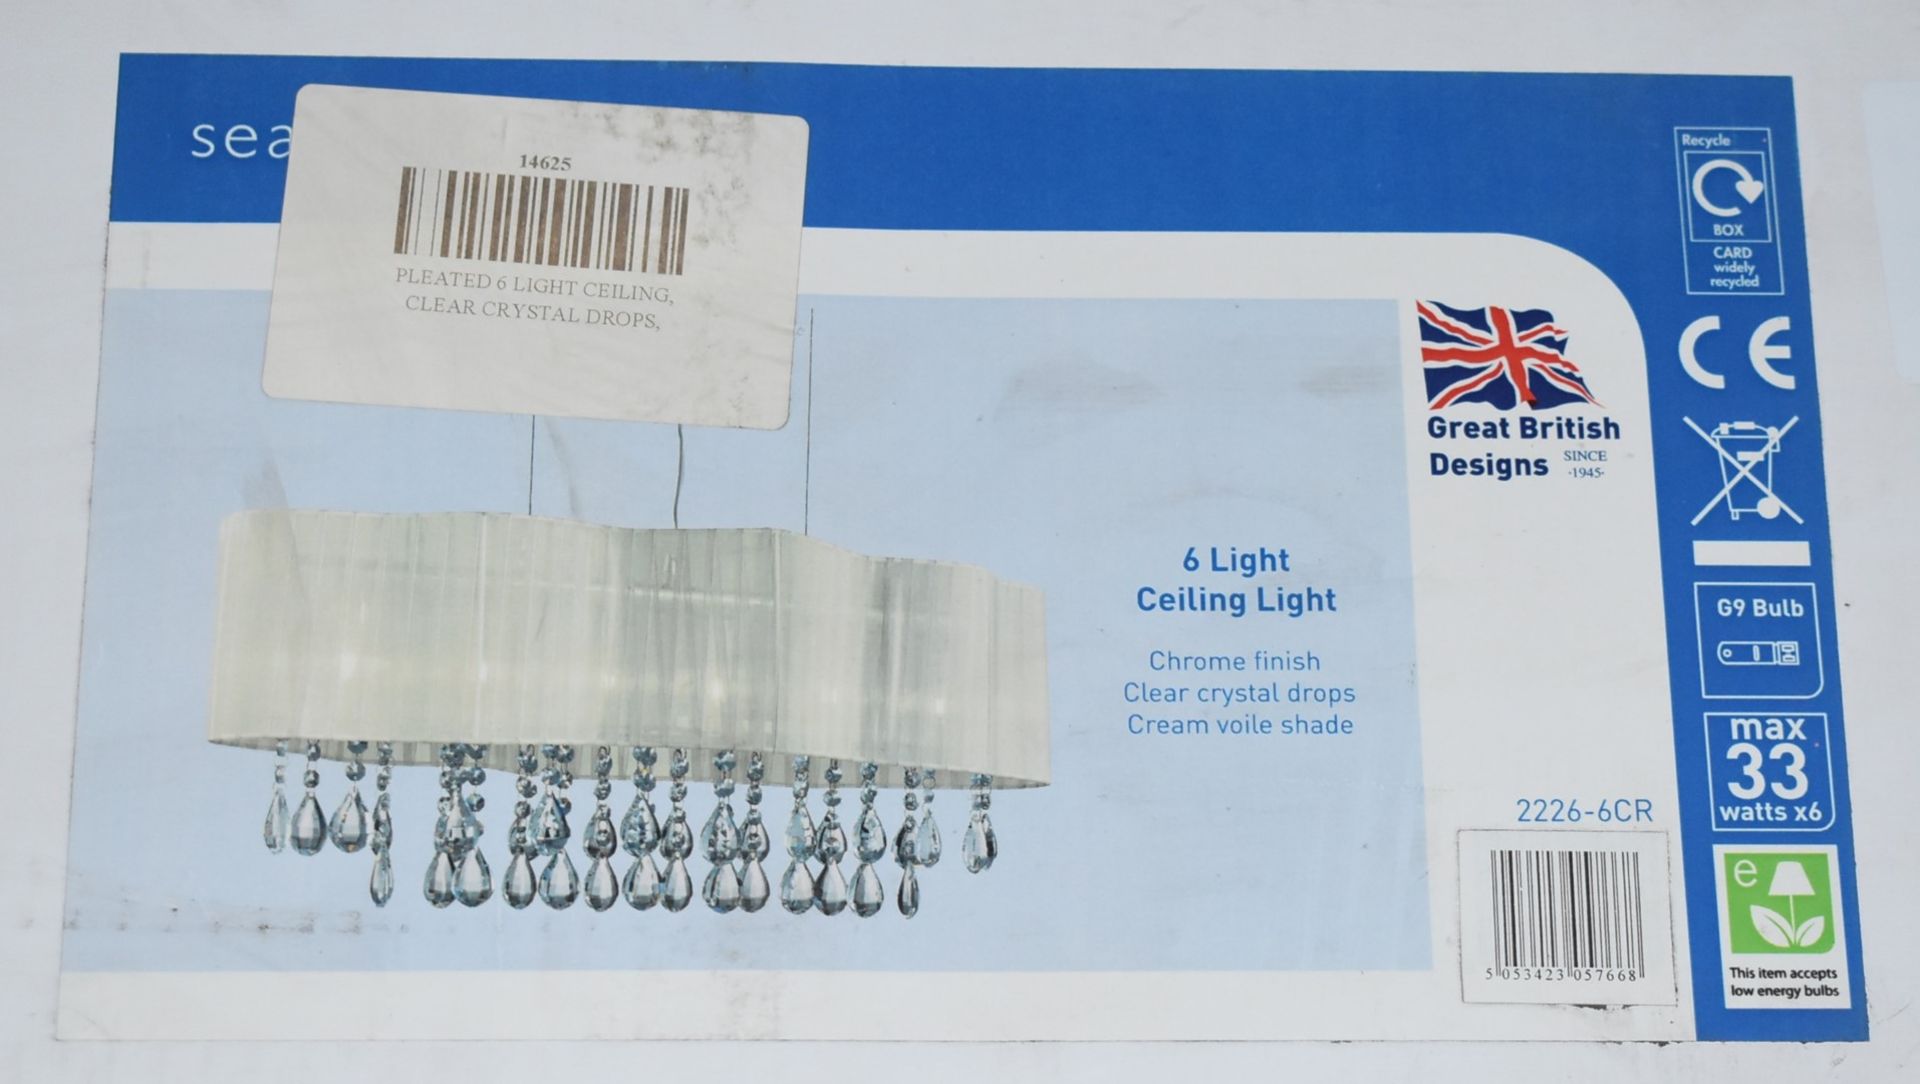 1 x Searchlight 6 Light Ceiling Light - Chrome Finish, Clear Crystal Drops and Cream Voile Shade - Image 5 of 5